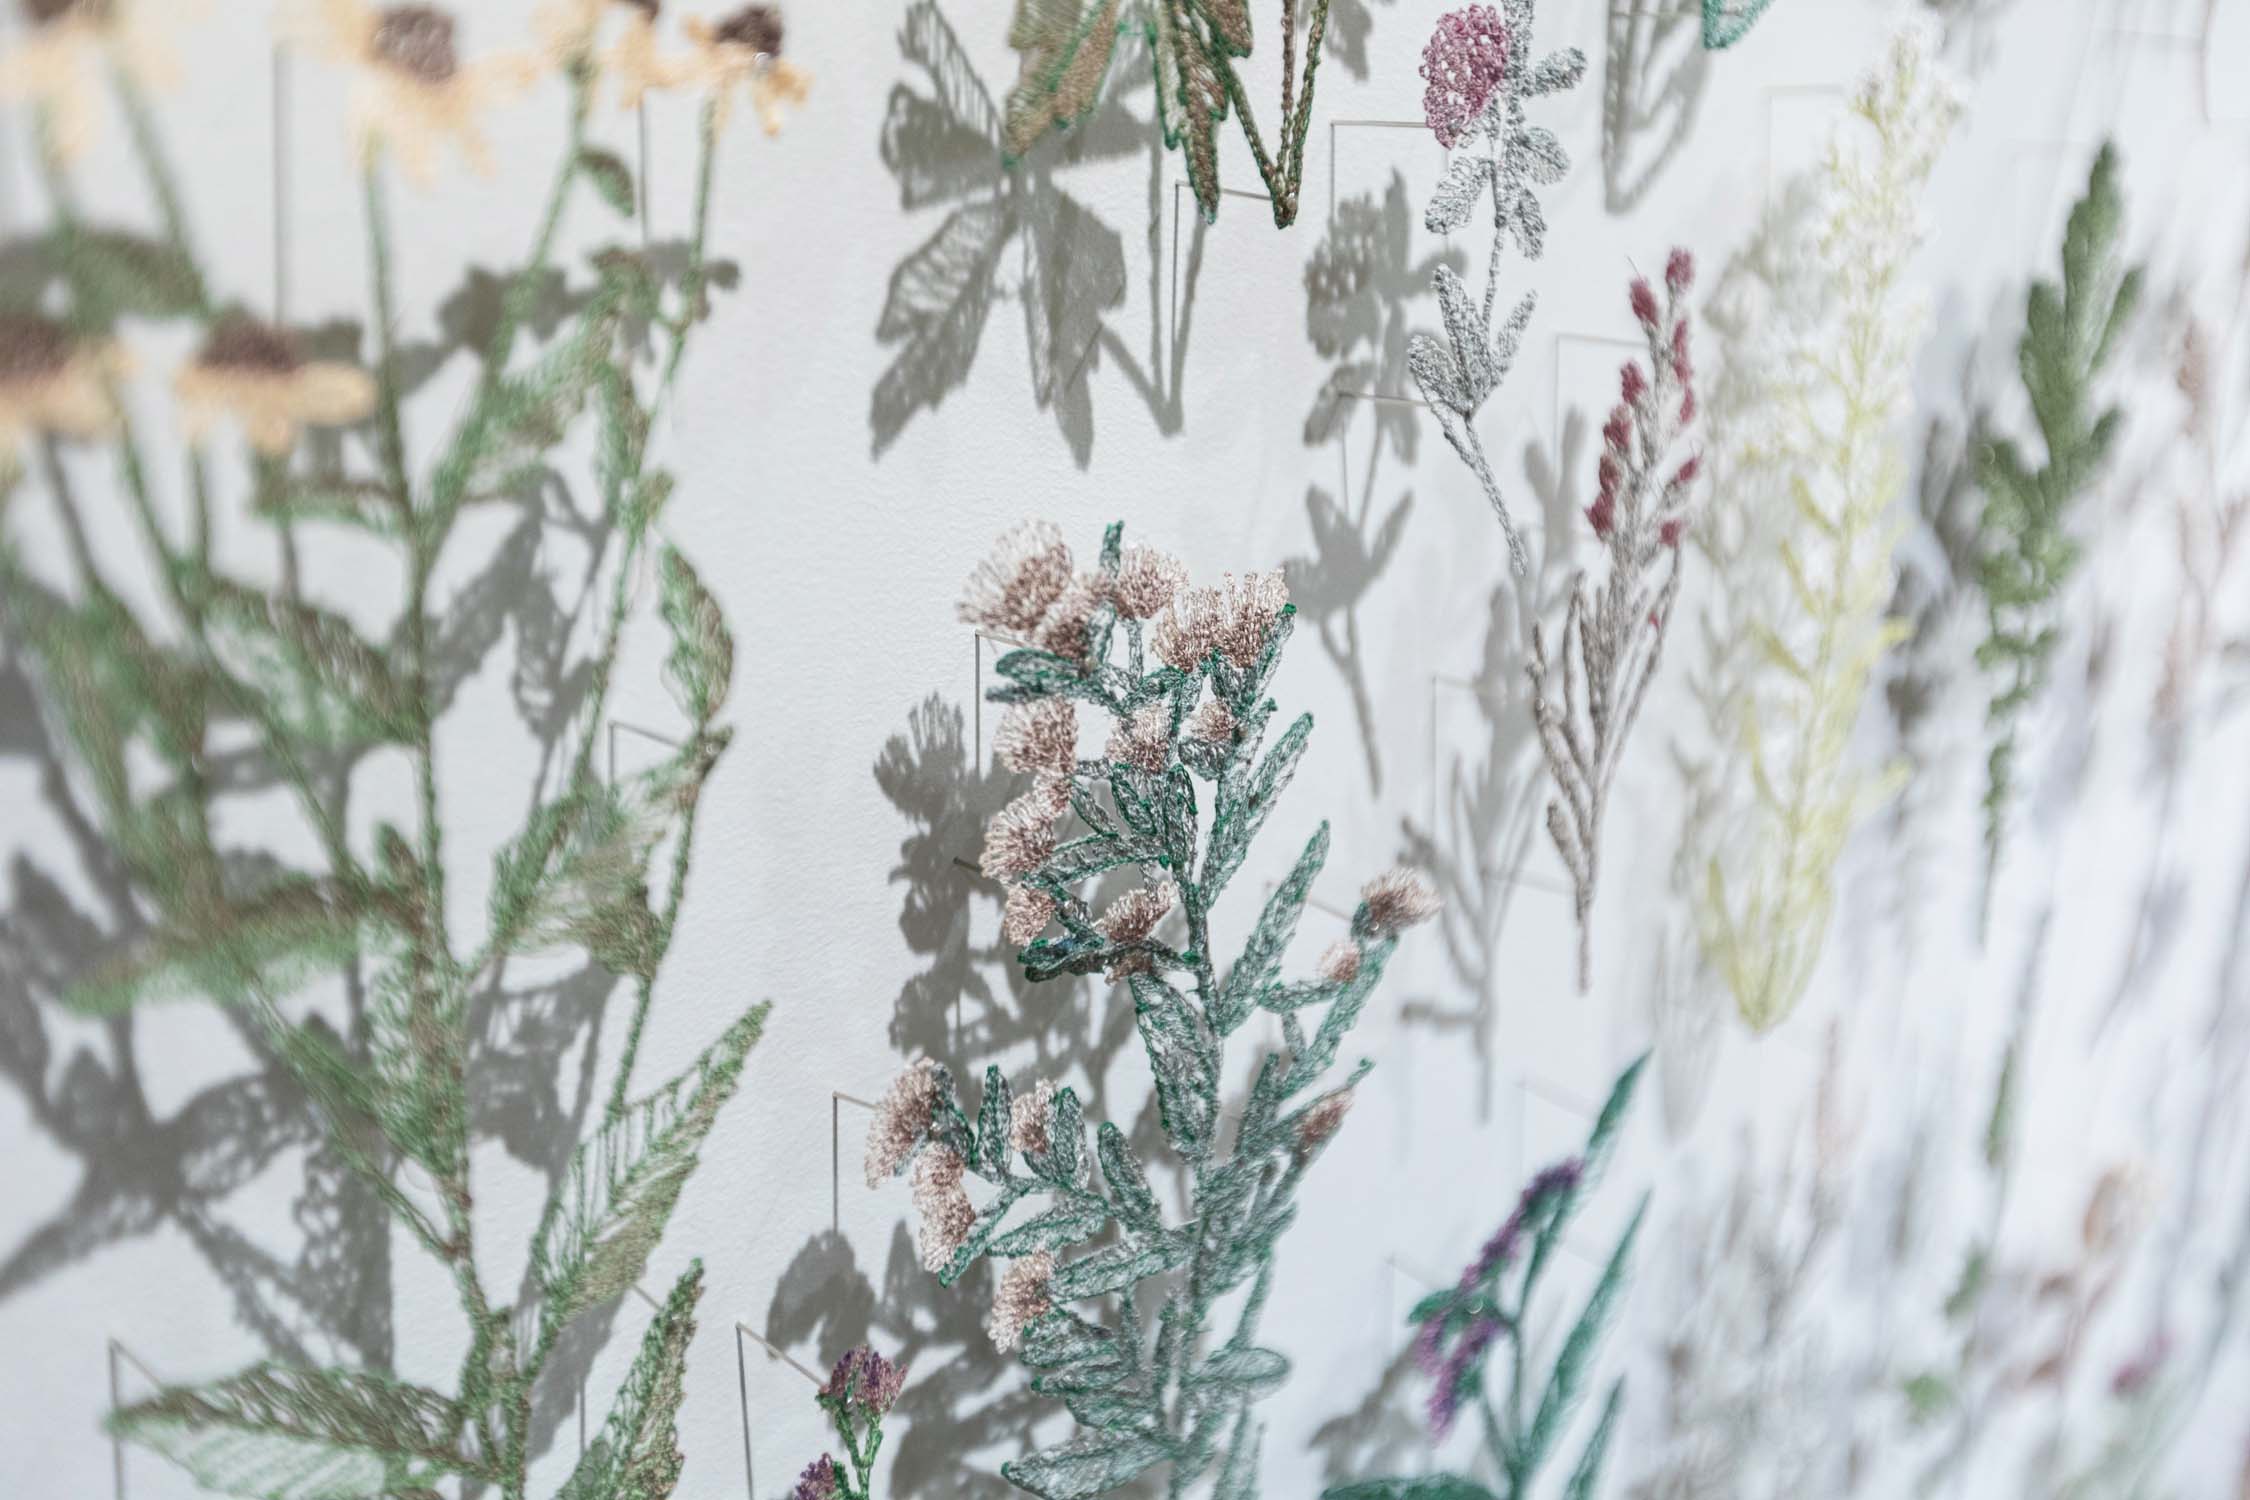 Close-up of a white wall mounted with thread sketches of plants, with shadows visible behind them